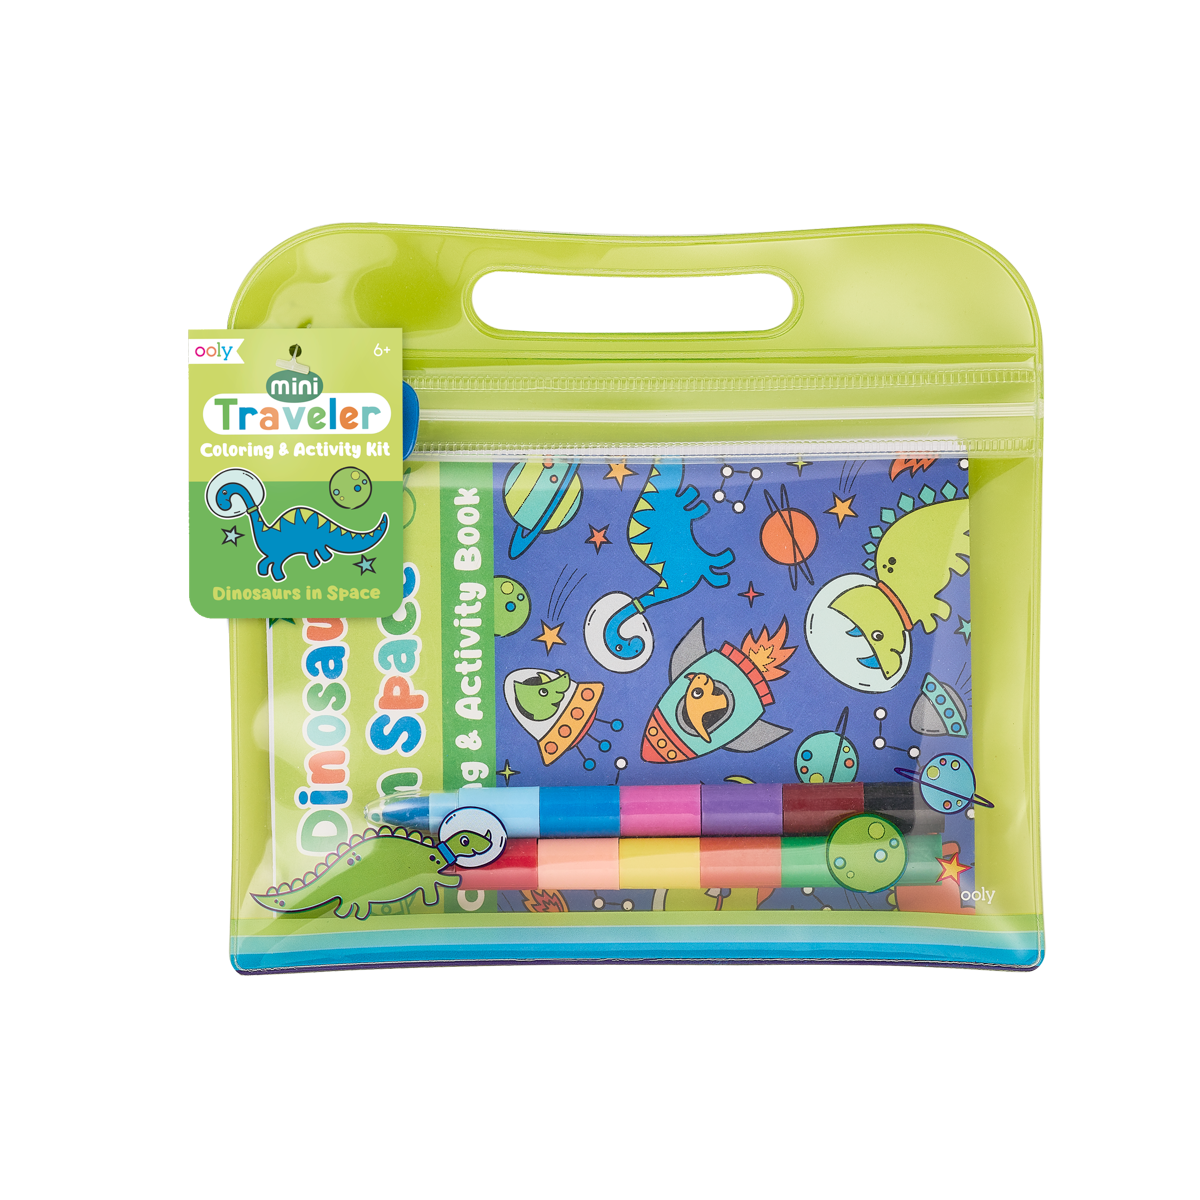 OOLY Mini Traveler Coloring + Activity Kit - Dinosaurs in Space in travel case